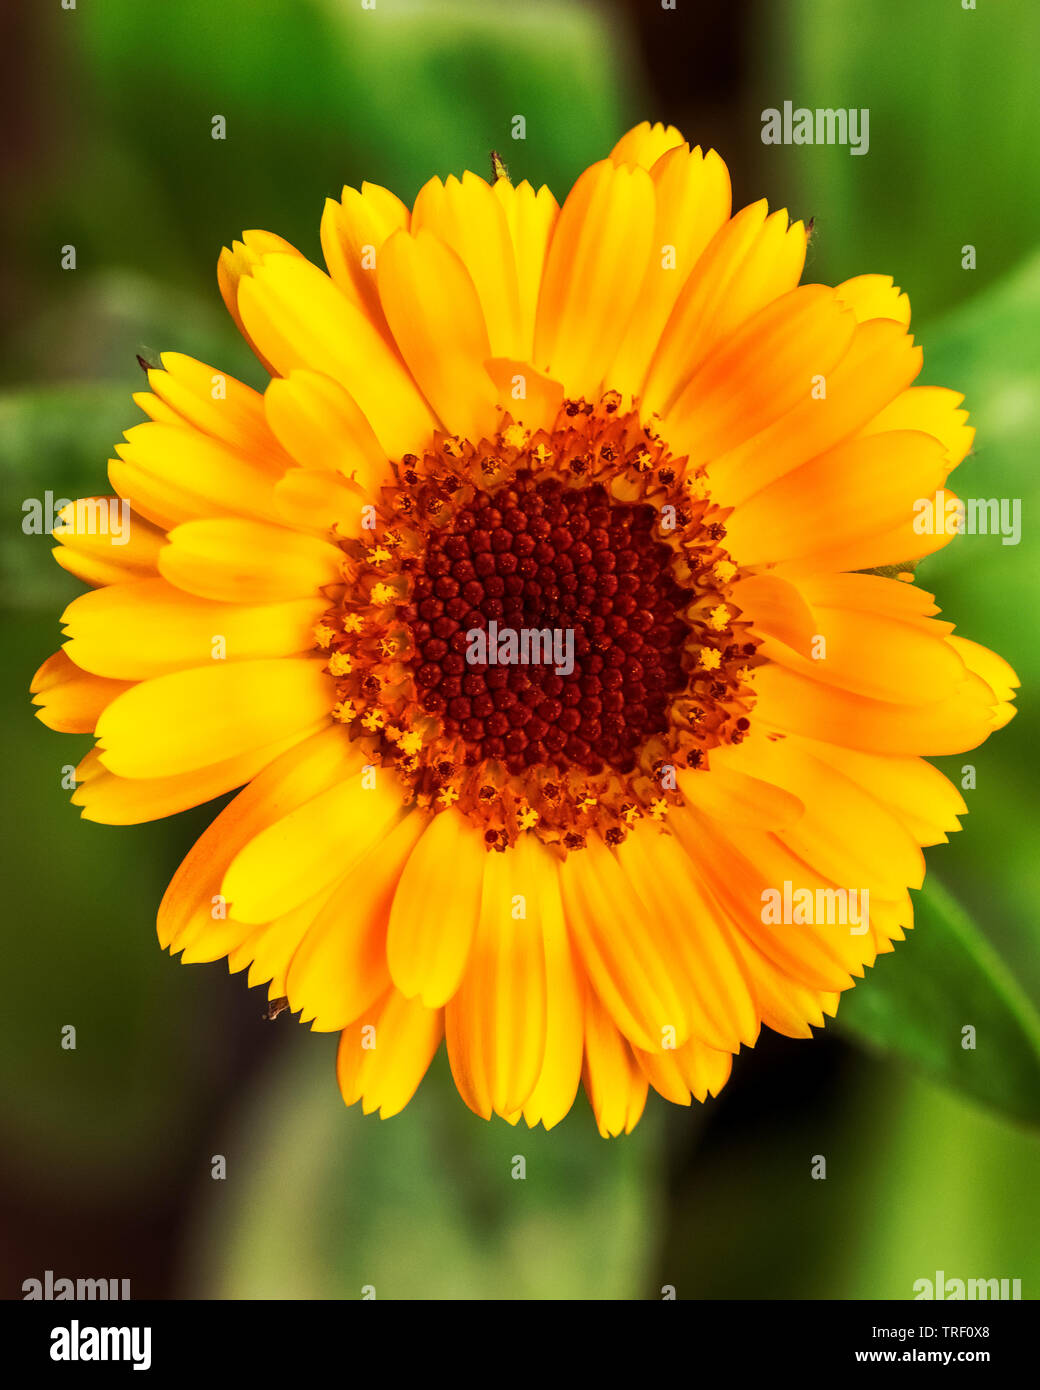 Yellow Zinnia Flower Beautiful Zinnia Flowers On Green Leaf Background Close Up View Of Zinnia Flowers In The Summer Garden Stock Photo Alamy